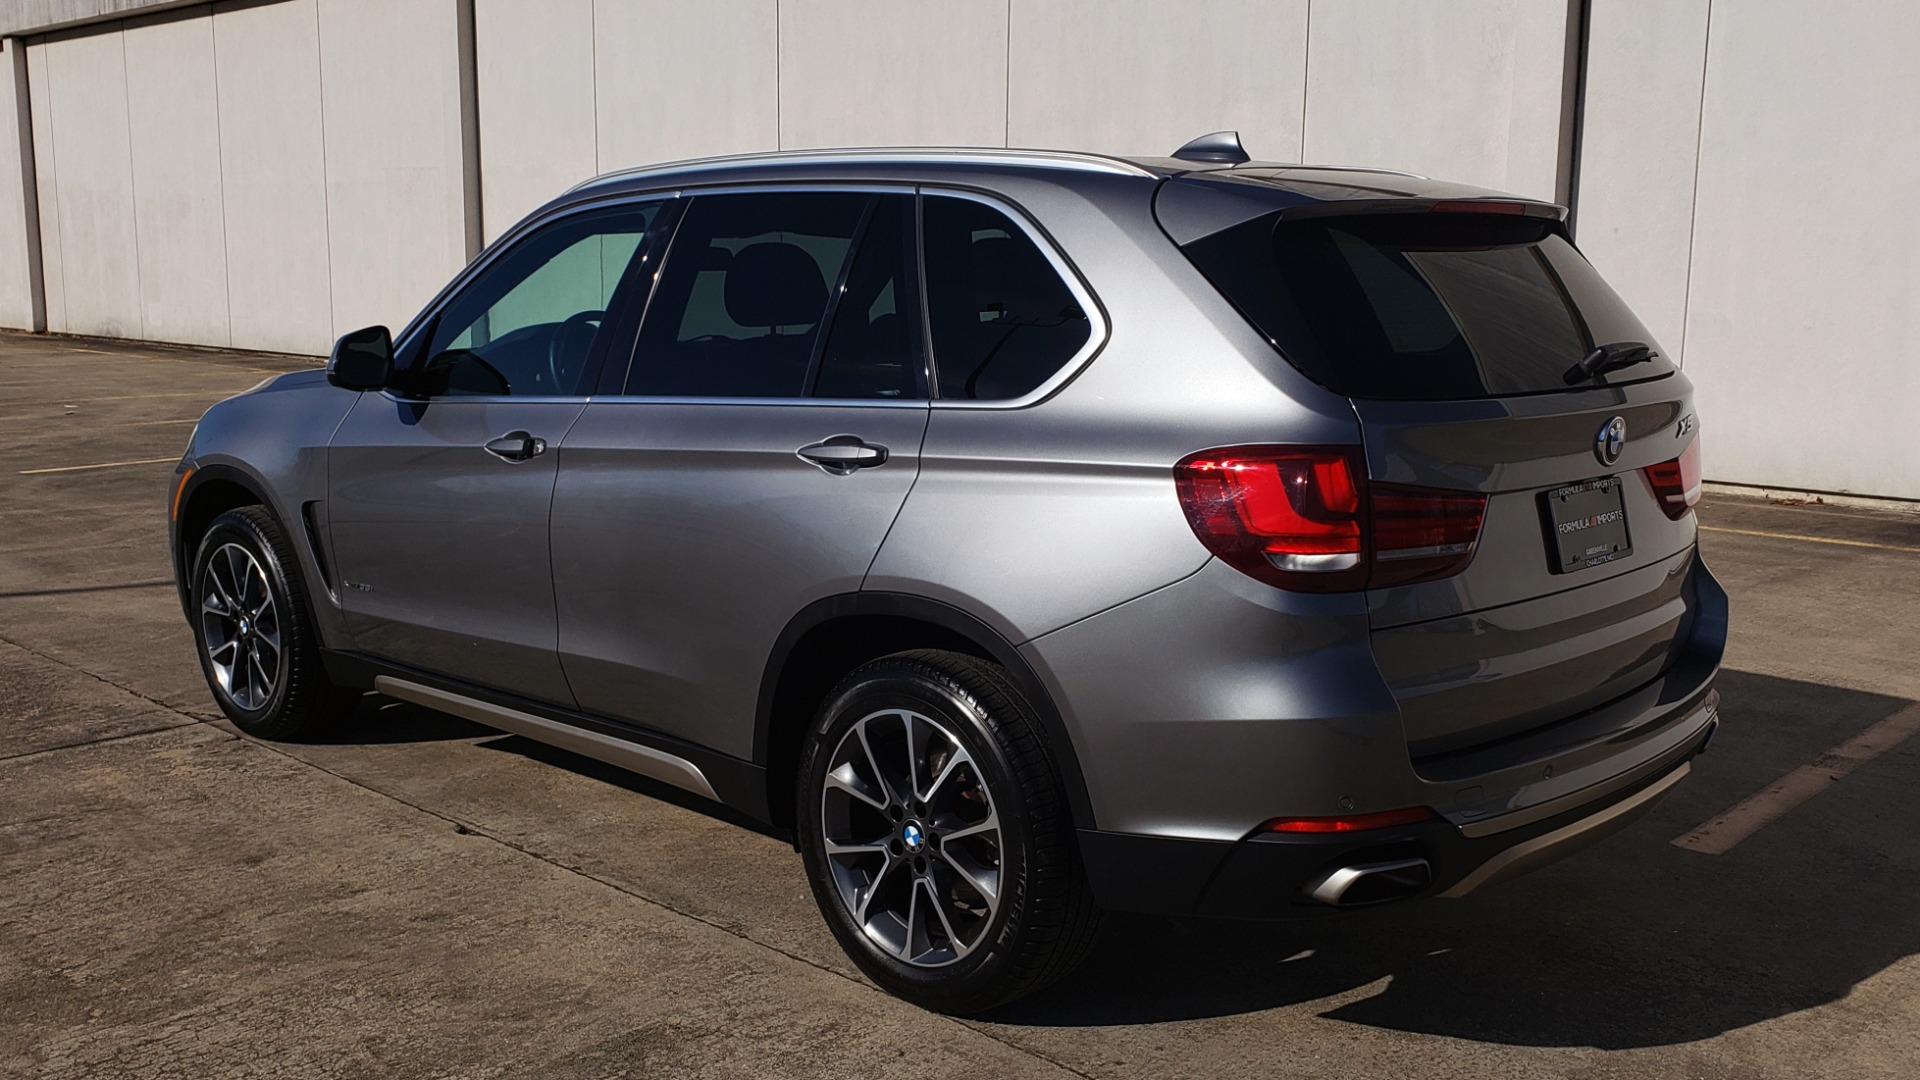 Used 2018 BMW X5 XDRIVE35I PREMIUM 3.0L SUV / DRVR ASST / NAV / HUD / SUNROOF / REARVIEW for sale $40,995 at Formula Imports in Charlotte NC 28227 3